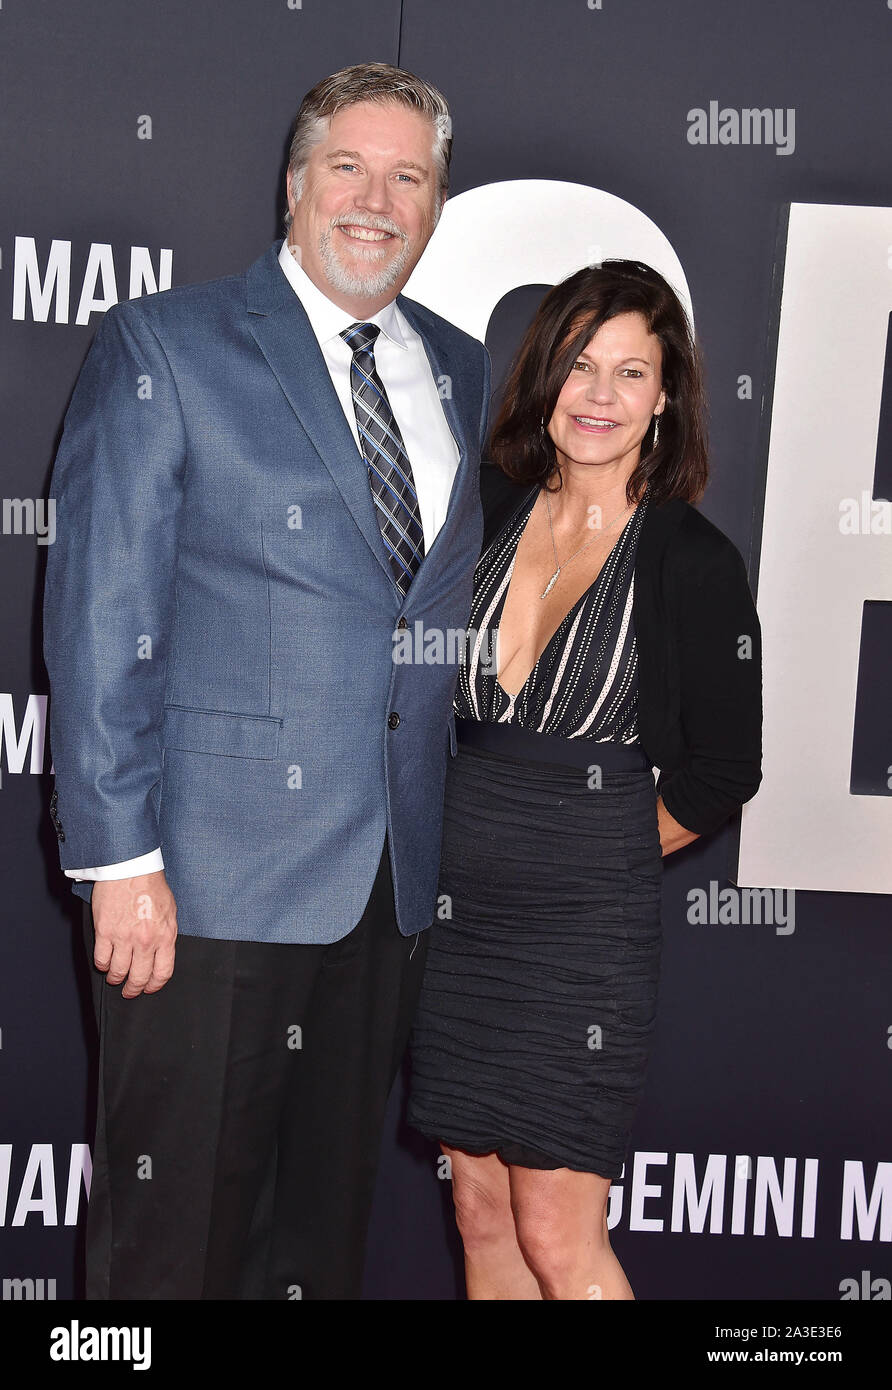 HOLLYWOOD, CA - OCTOBER 06:  Bill Westenhofer and Linda Westenhofer attend Paramount Pictures' Premiere Of 'Gemini Man' at TCL Chinese Theatre on October 06, 2019 in Hollywood, California. Stock Photo